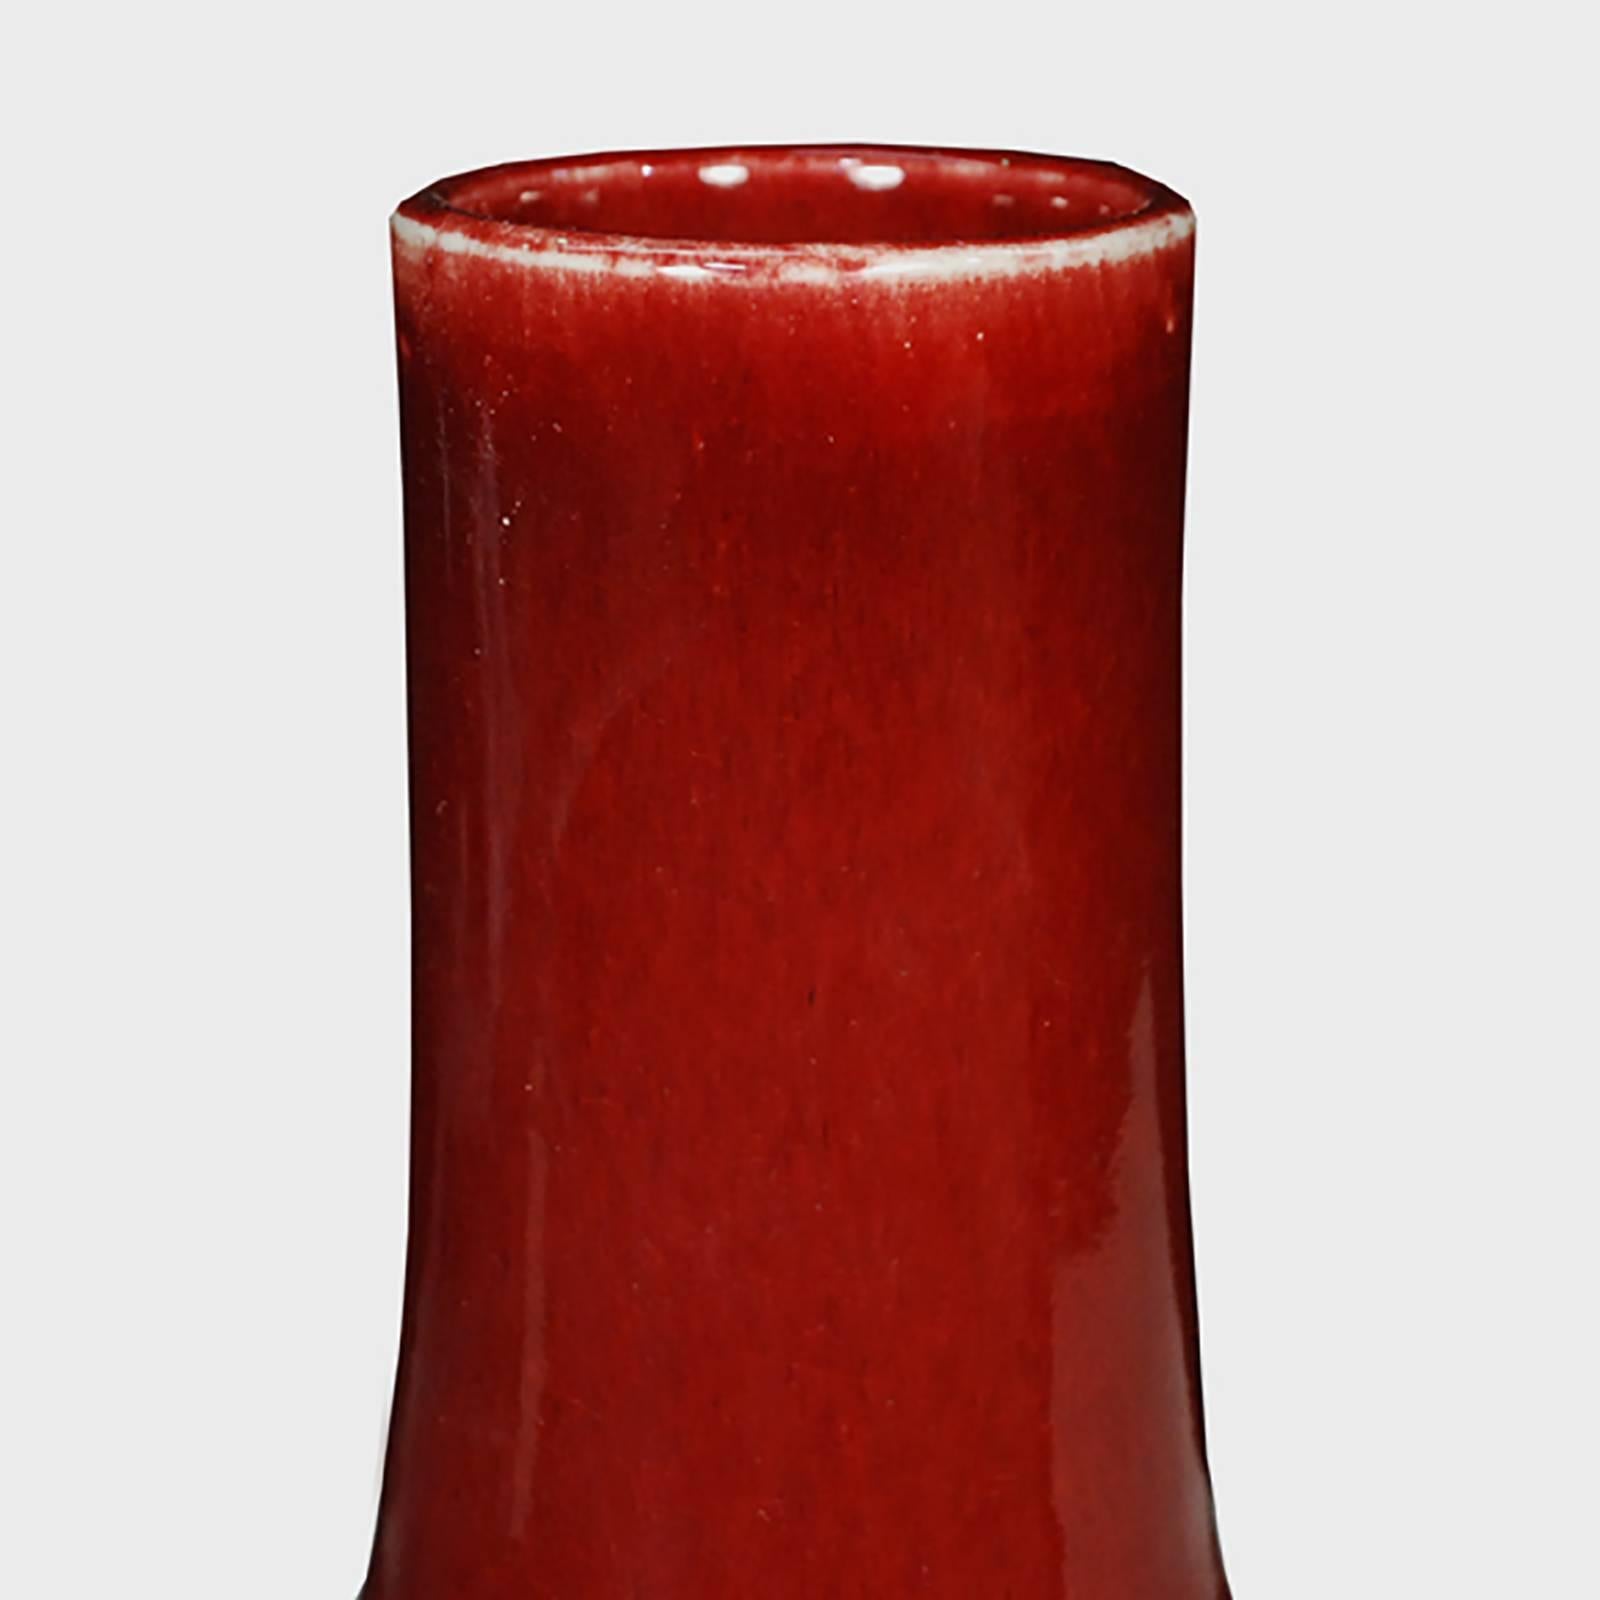 A simple and modern shape defines these bottleneck vases, known as such because of their shorter necks. The vases' deep, rich red glaze is often called 